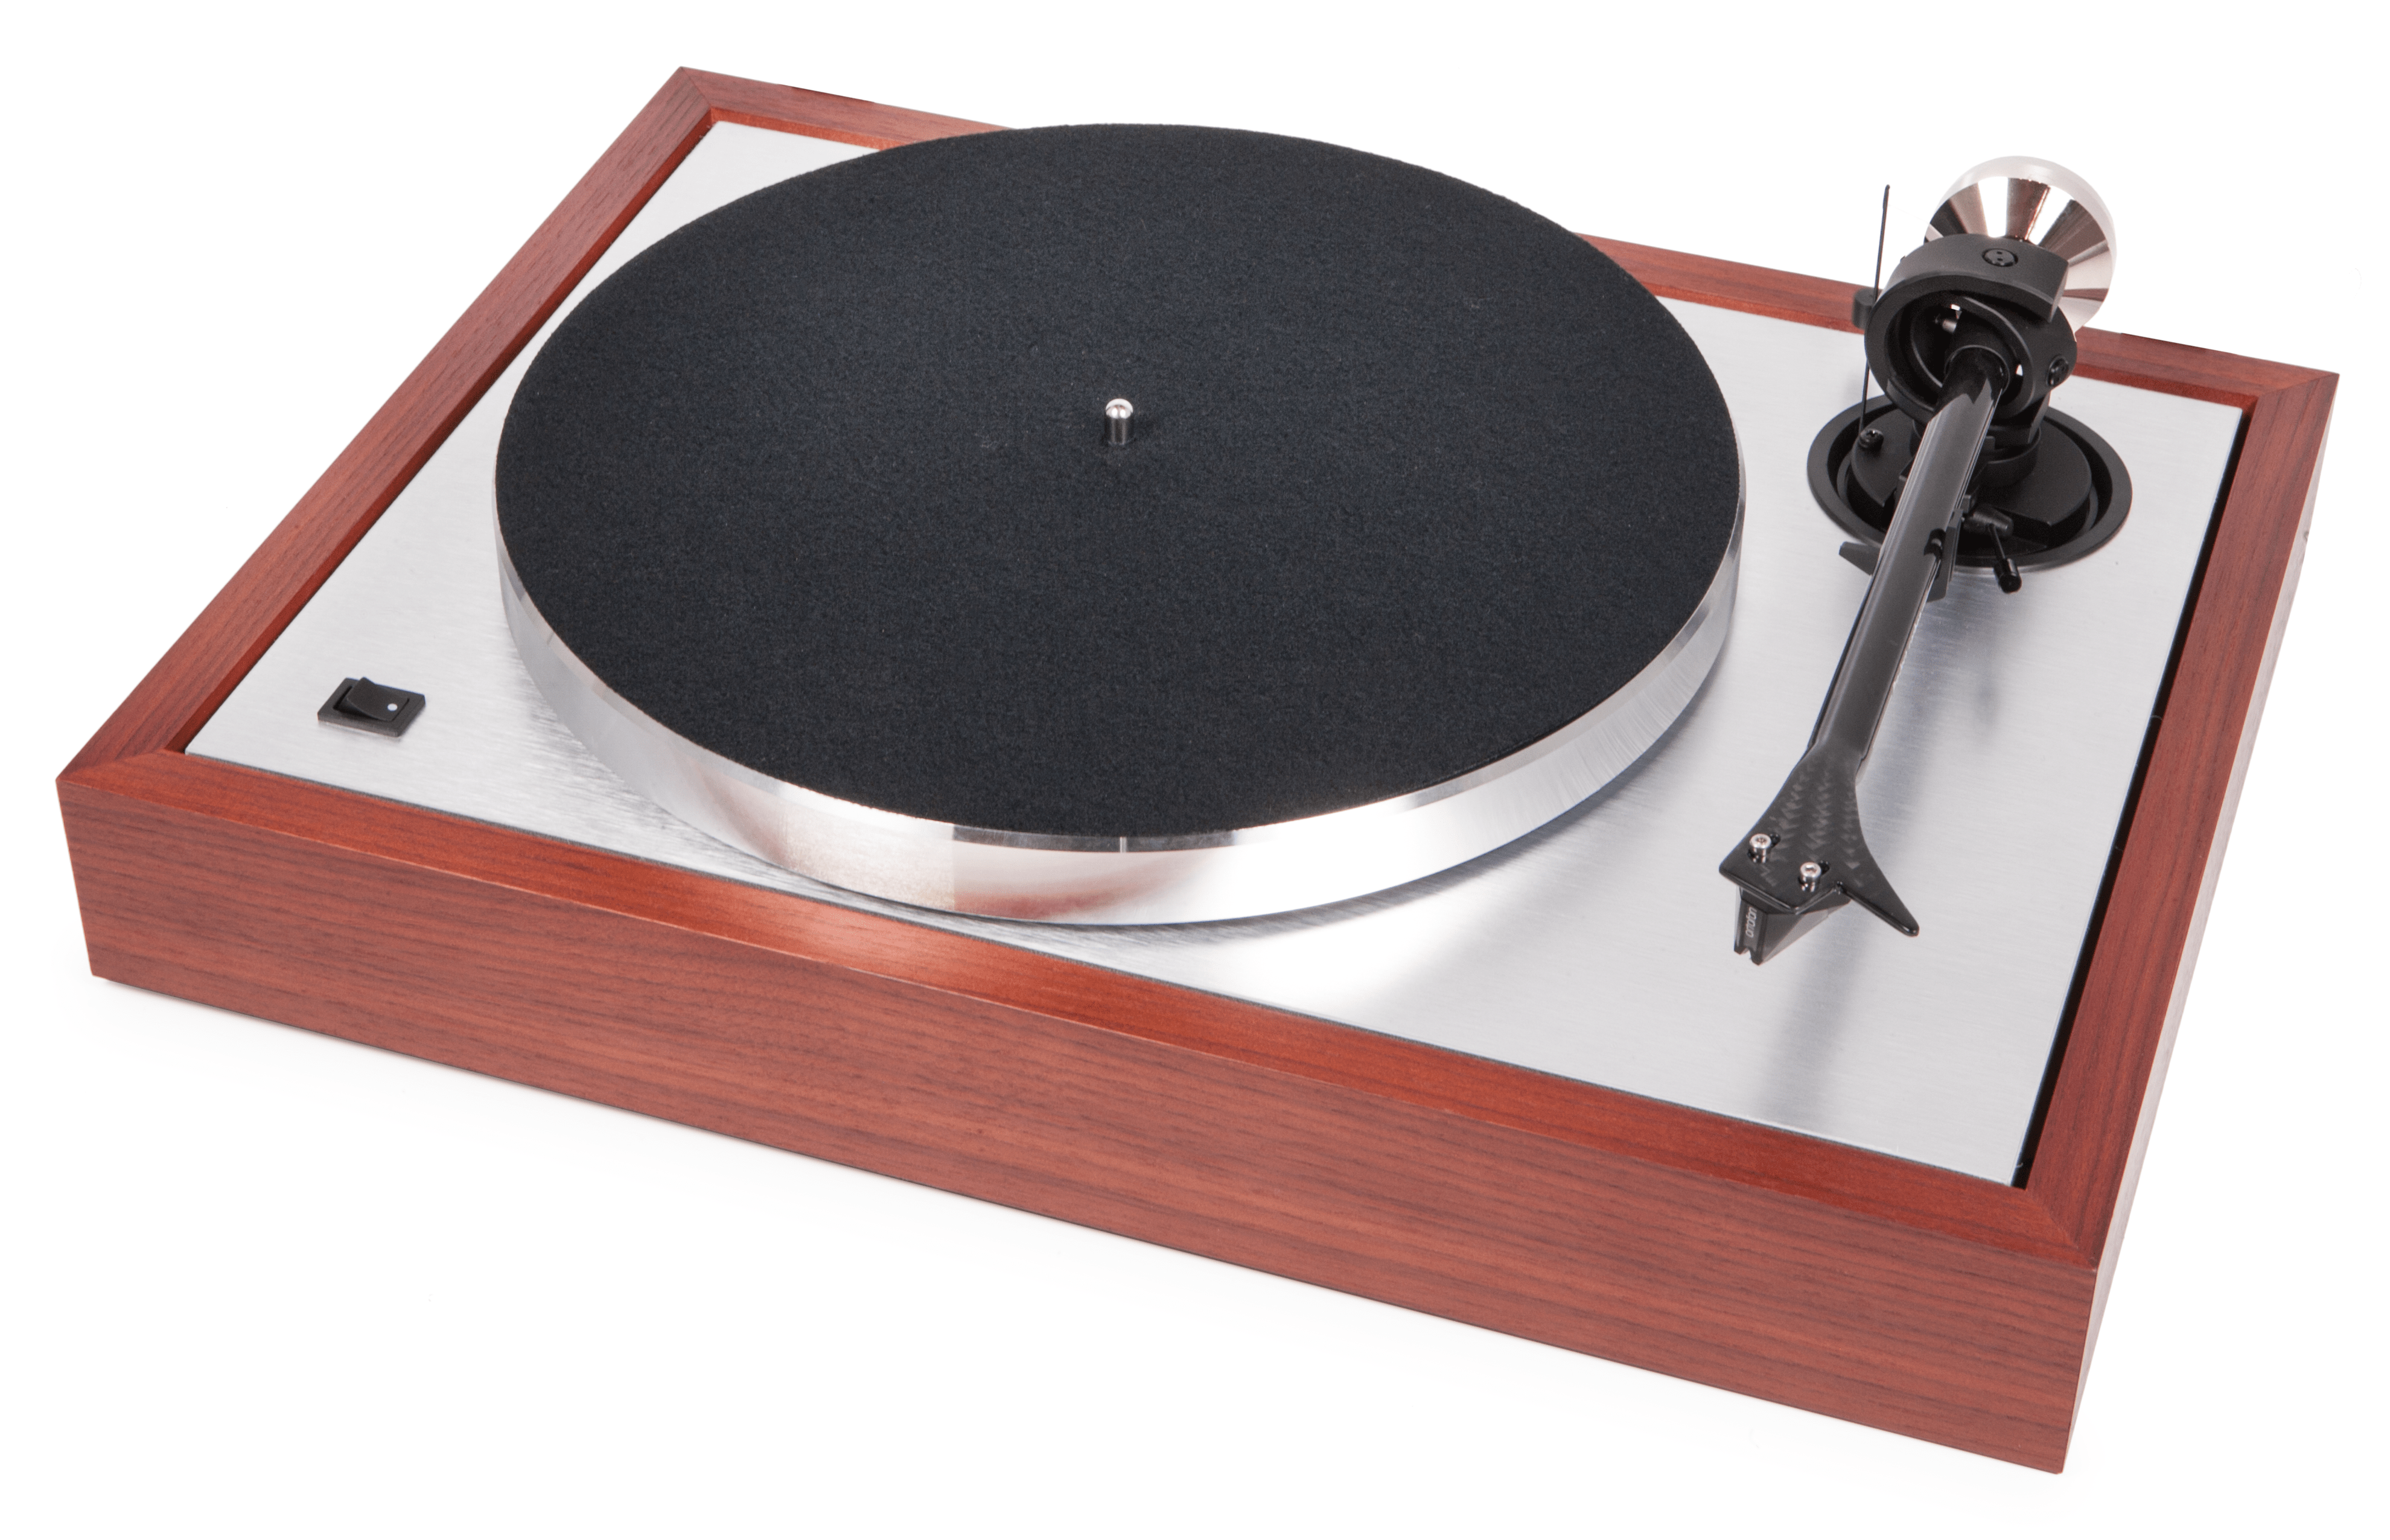 Detail Pro Ject Beatles Turntable Nomer 16